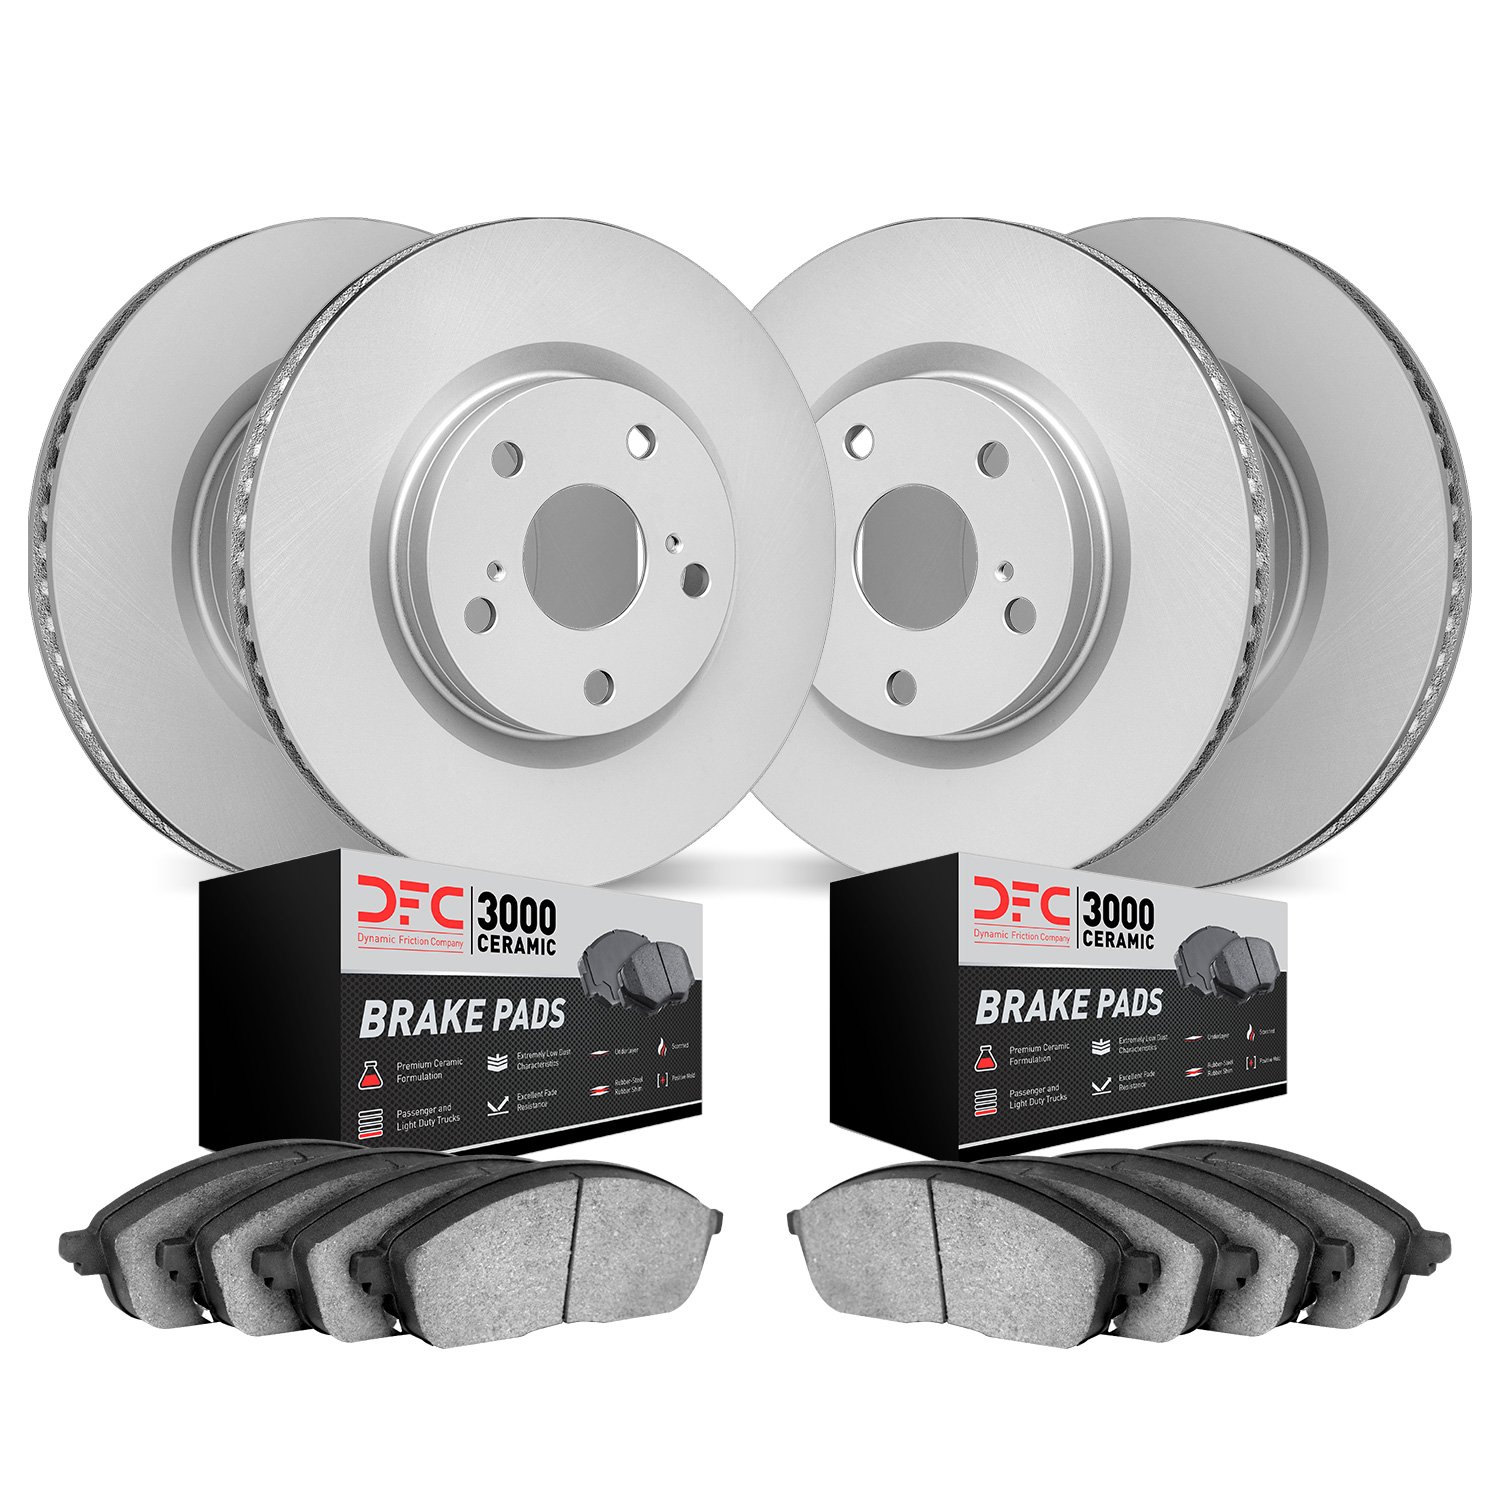 4304-67037 Geospec Brake Rotors with 3000-Series Ceramic Brake Pads Kit, 2014-2017 Infiniti/Nissan, Position: Front and Rear